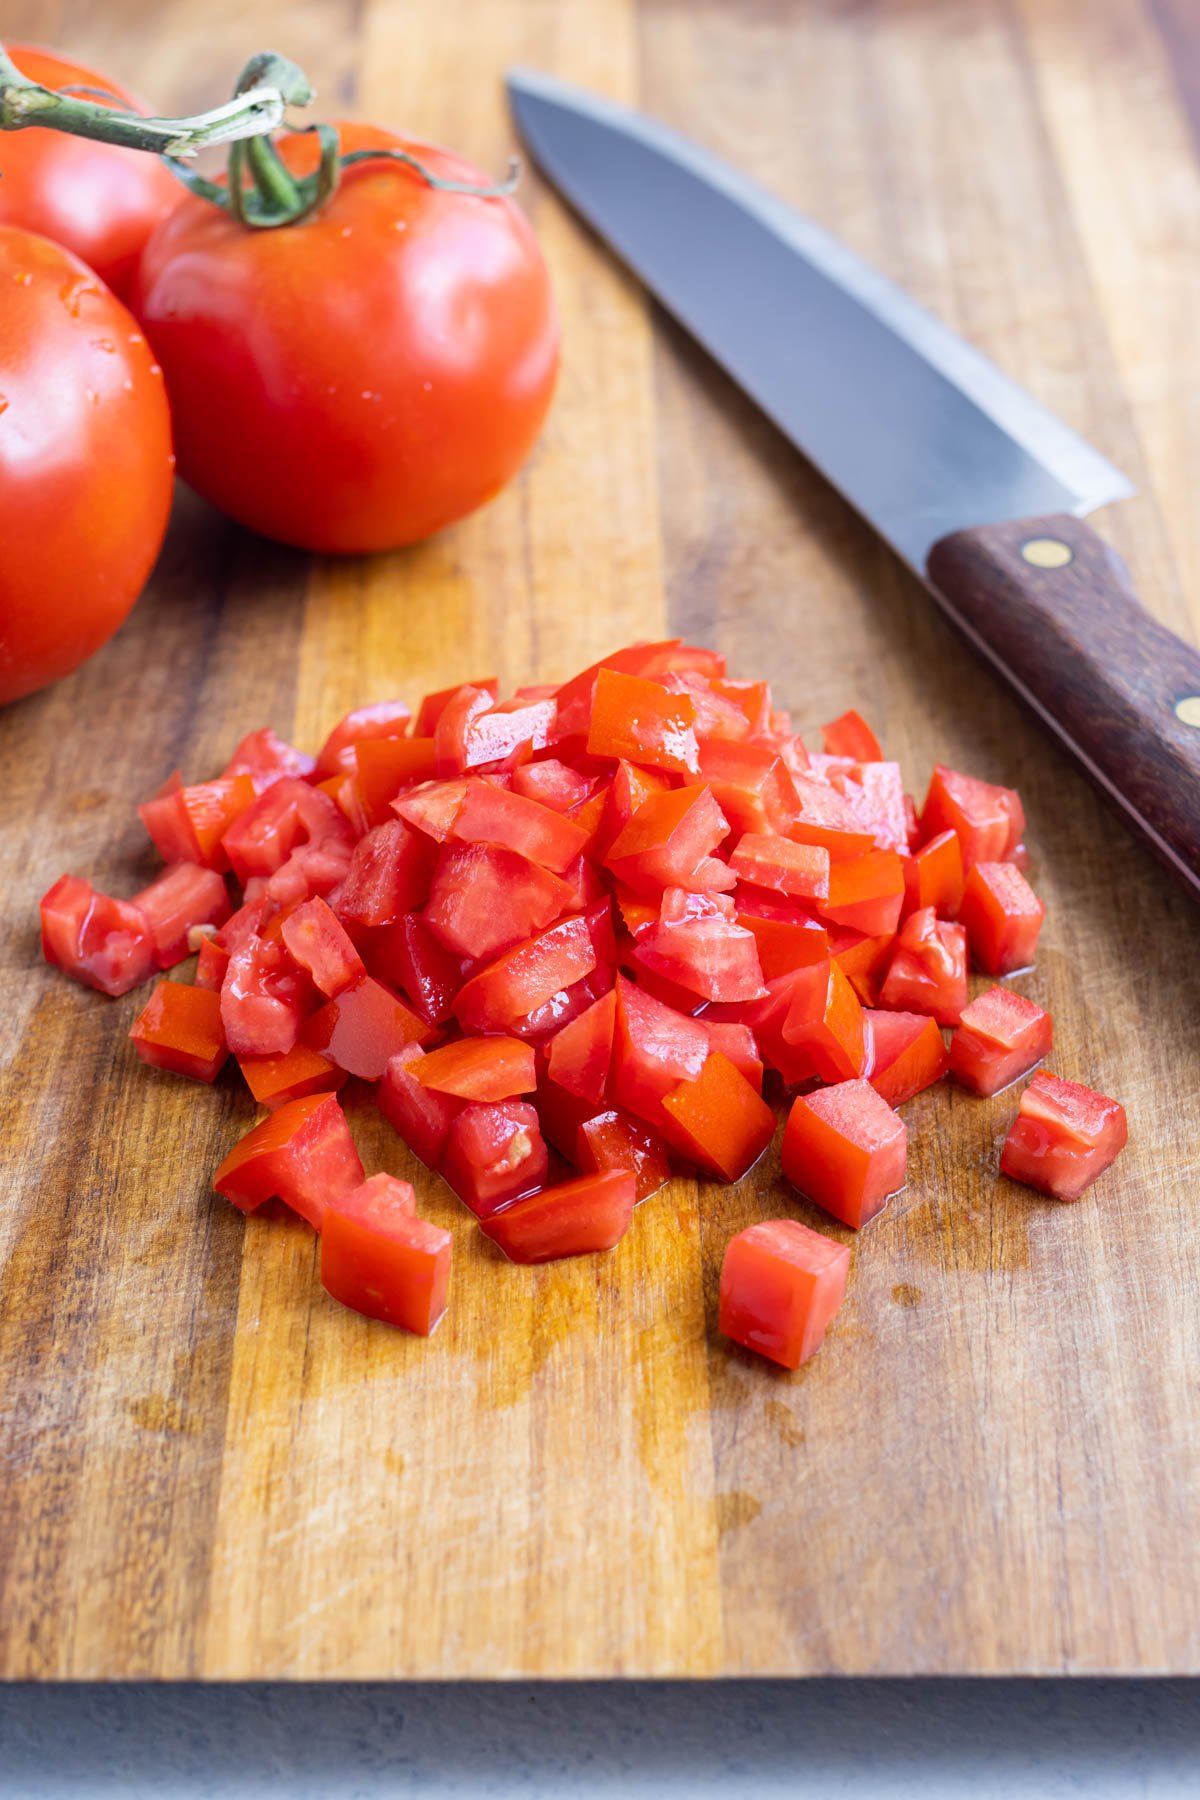 A sharp knife is used to dice tomatoes easily.